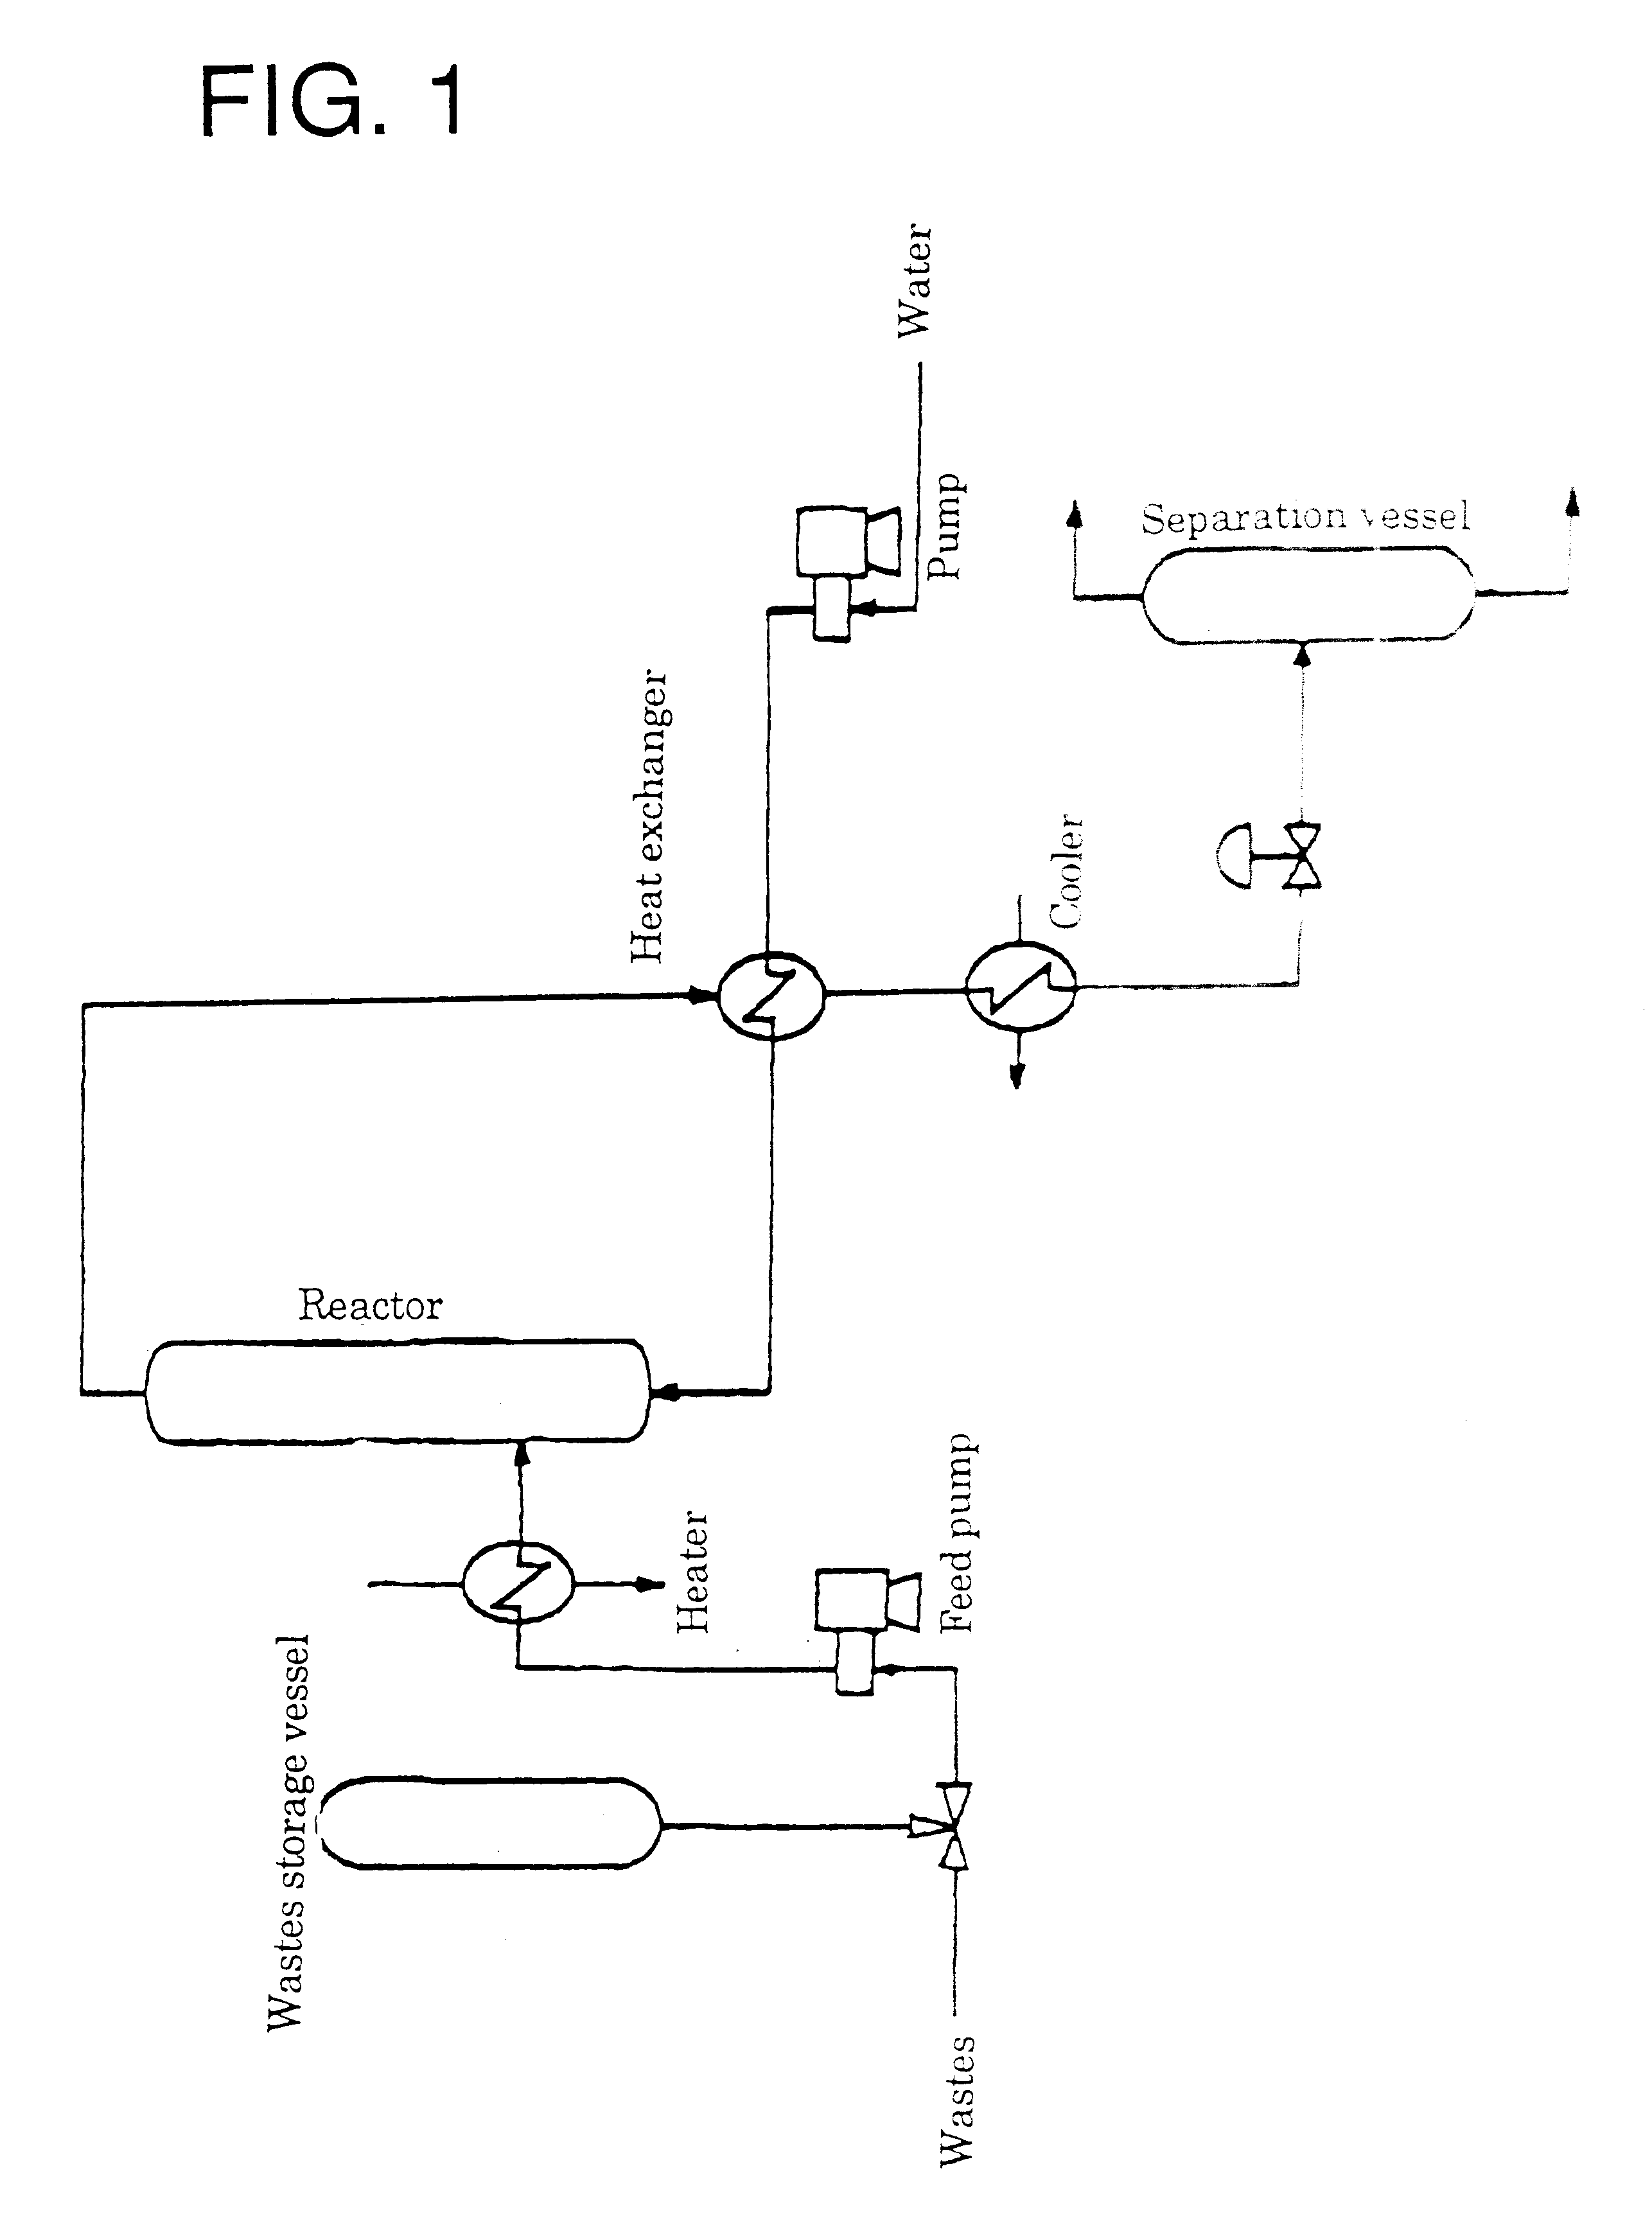 Method of and apparatus for decomposing wastes